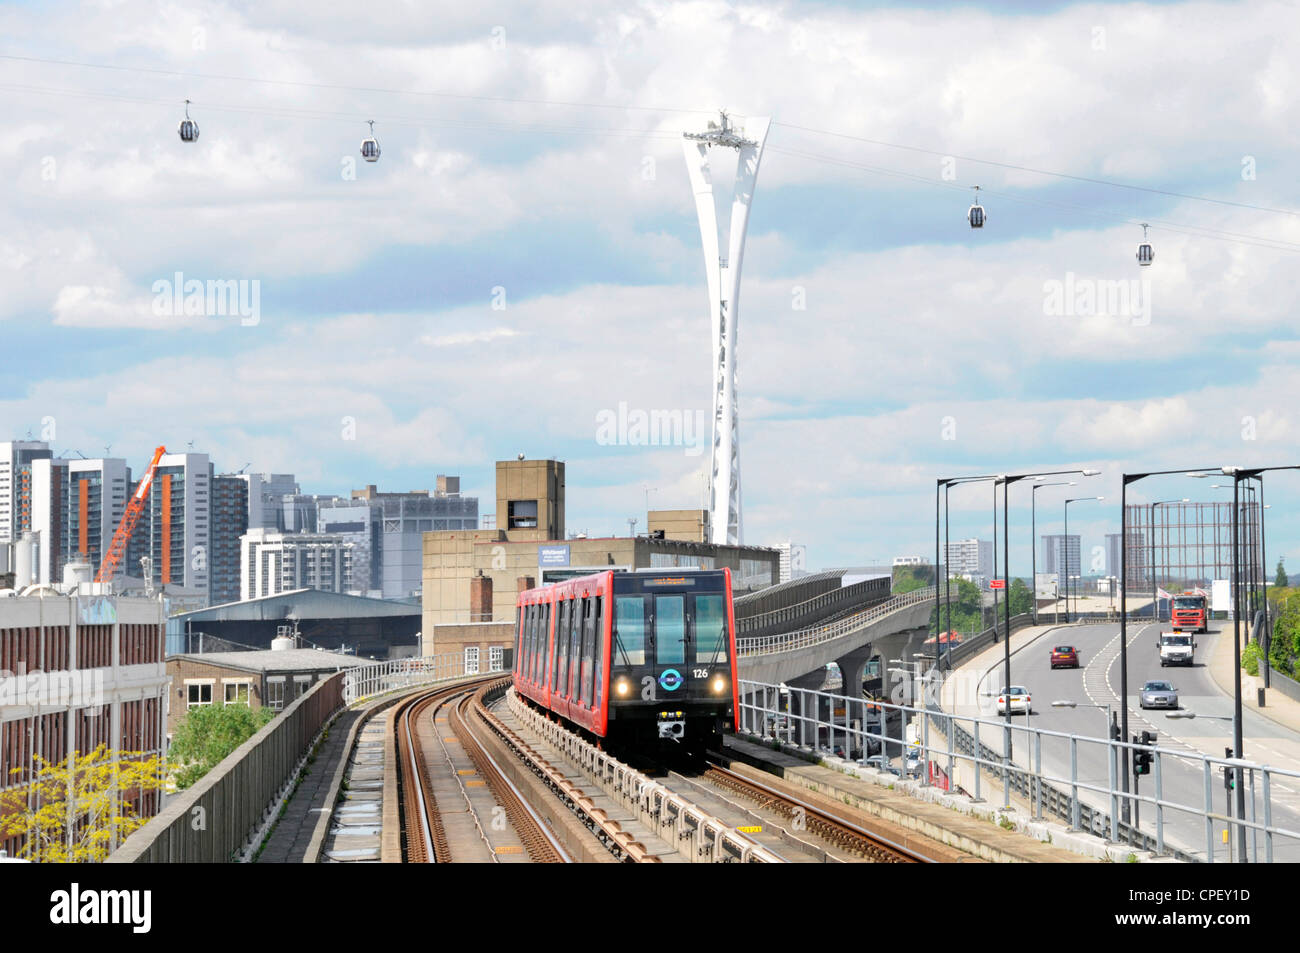 Docklands light railway train with Emirates Air Line cable car gondolas beyond Stock Photo